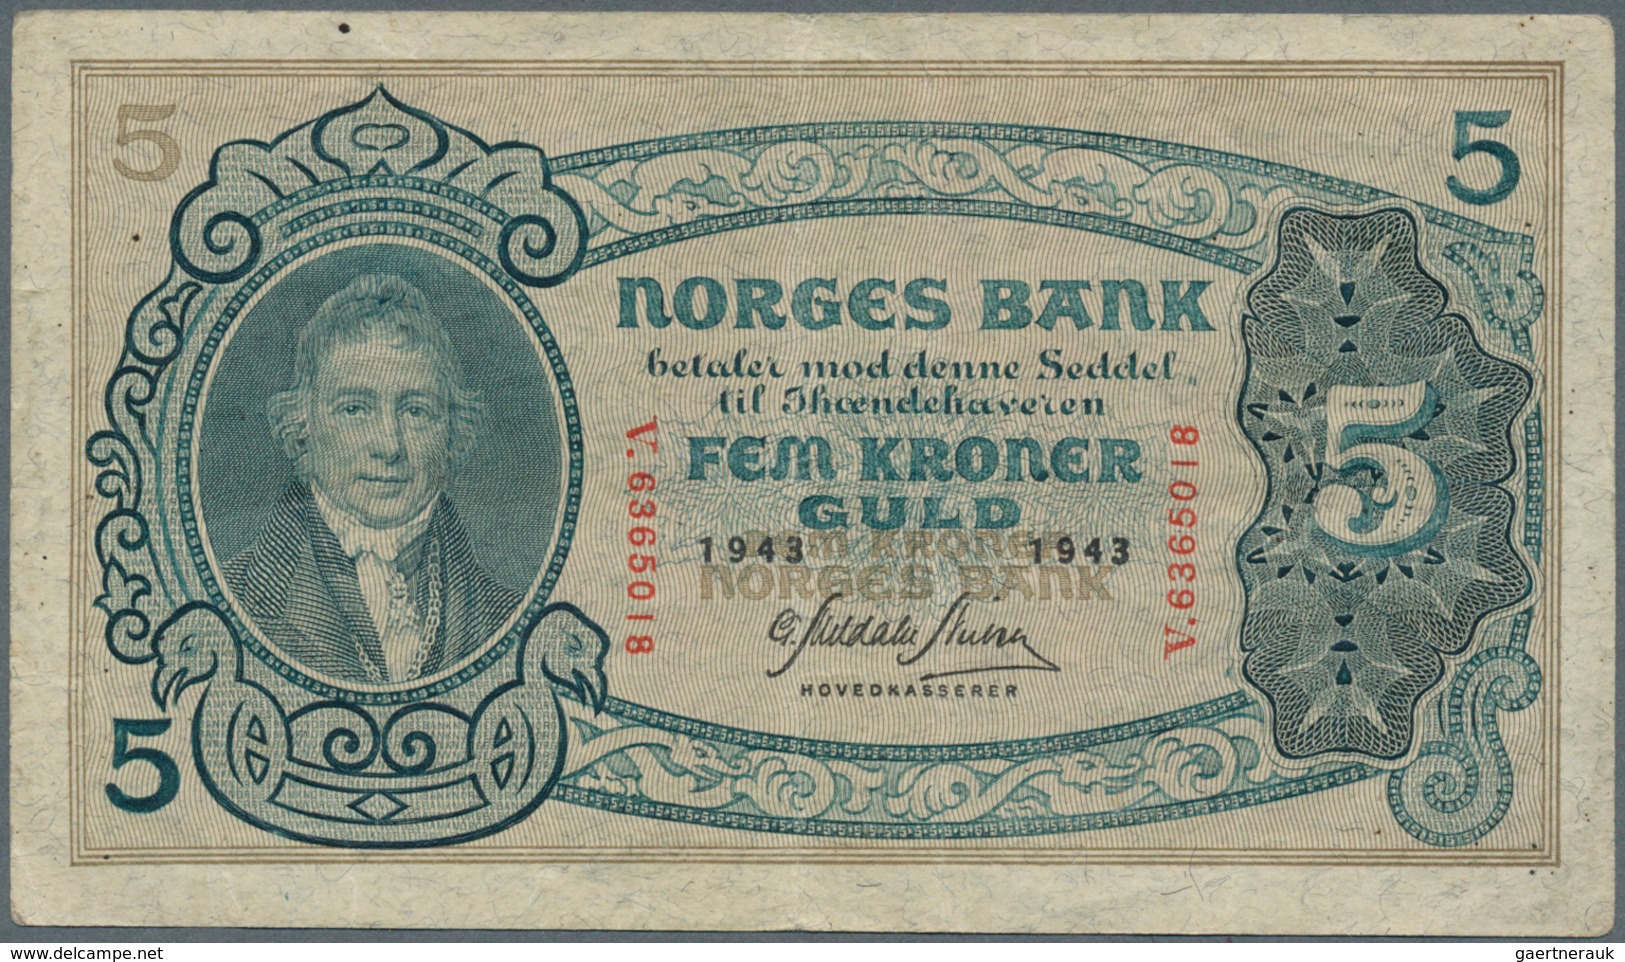 02168 Norway / Norwegen: set of 6 pcs used banknotes containing 2x 50 Kroner 1942 and 1943, 2x 5 Kroner 19